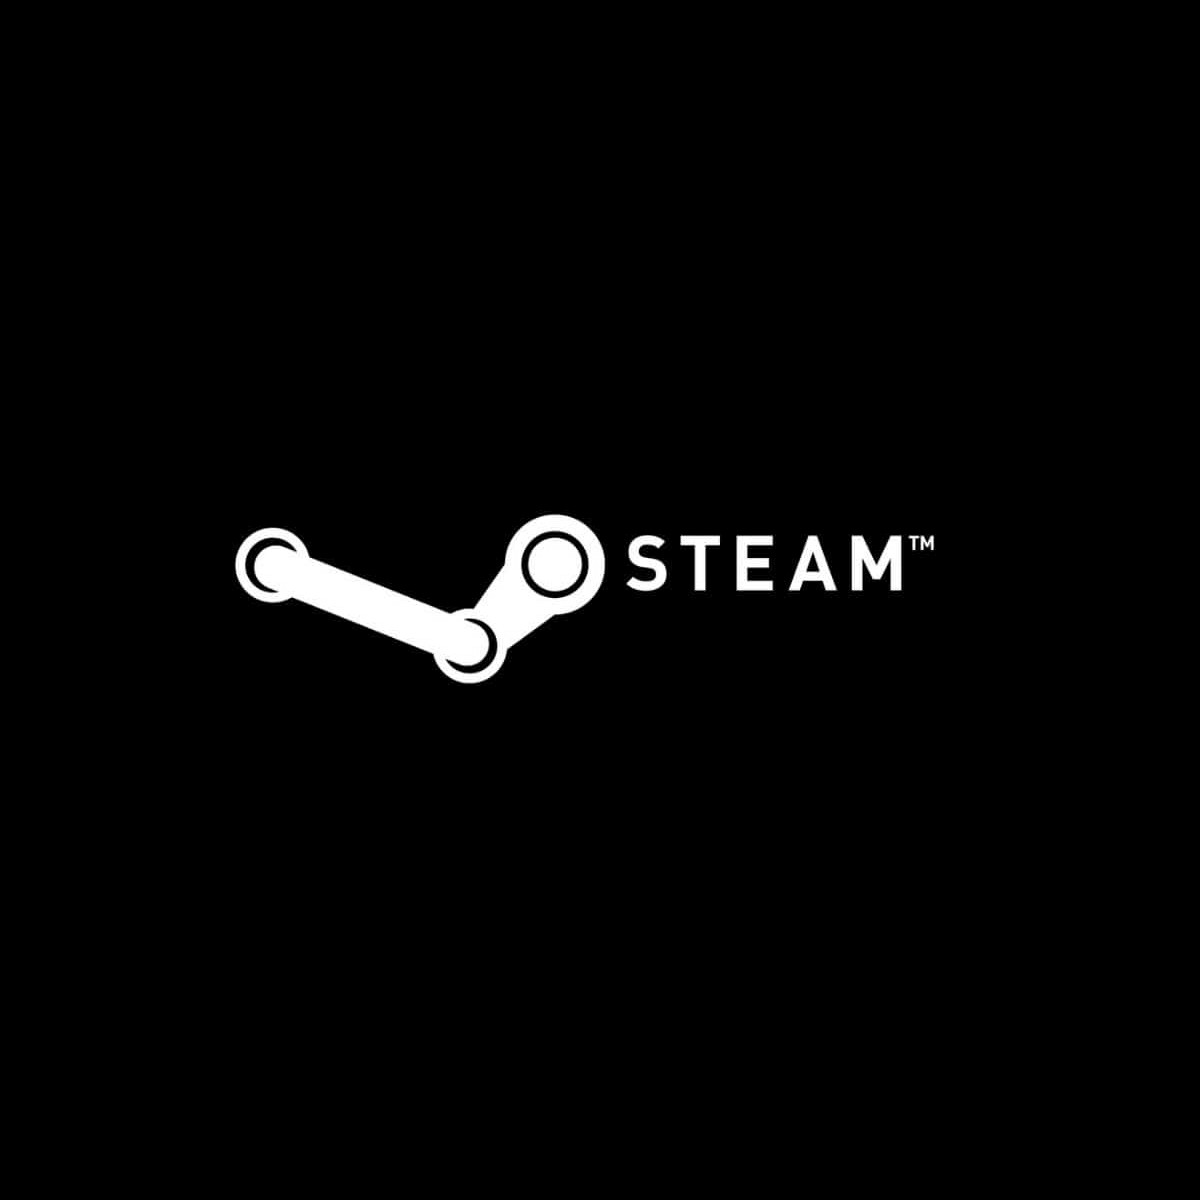 Unable to initialize SteamAPI